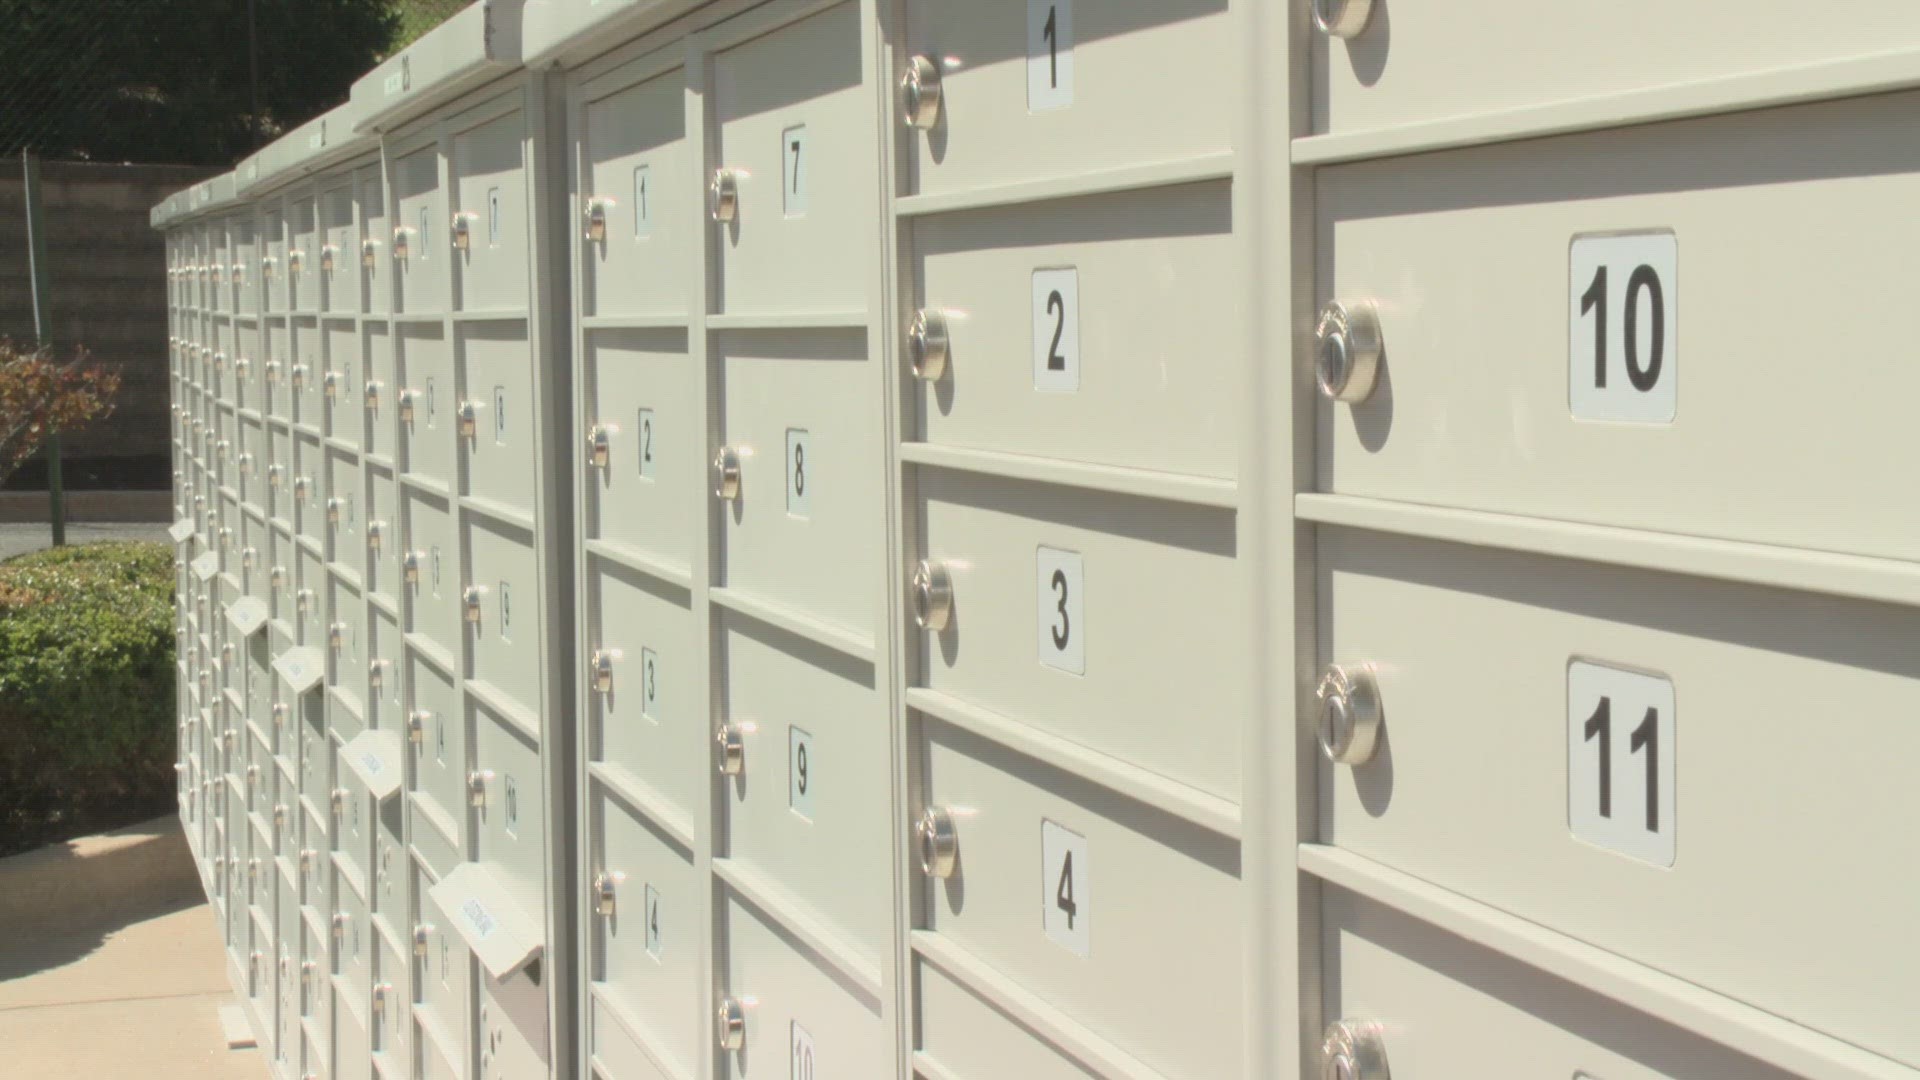 Two months after their post office closed, several Arnold residents say they're having problems getting their mail. They turned to 5 on Your Side.